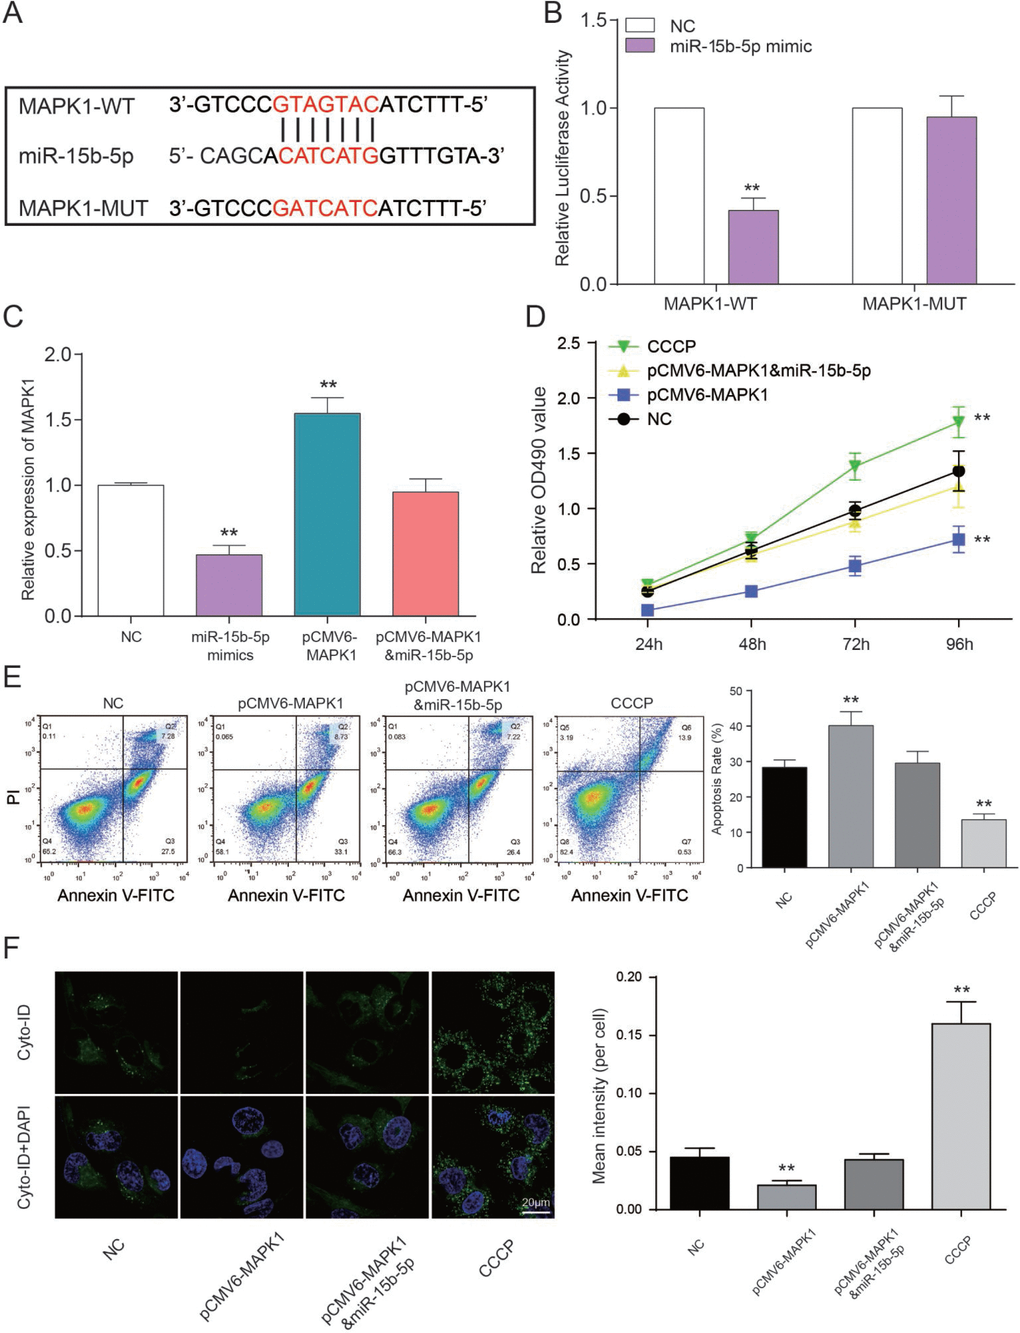 MAPK1 as a functional target of miR-15b-5p regulates CAD progression. (A) The predicted binding site. (B) Co-transfection of MAPK1 wild type and miR-15b-5p mimics decreased luciferase activity. **PC) MAPK1 was down-regulated by CCCP while up-regulated by pCMV6-MAPK1. MiR-15b-5p mimics + pCMV6-MAPK1 group was aligned with NC group. **PD) MTT results demonstrated that cell viability of EPCs were promoted by CCCP and inhibited by pCMV6-MAPK1. MiR-15b-5p mimics + pCMV6-MAPK1 group had almost no influence on cell viability of EPCs. **PE) FCM results illustrated that CCCP group presented declined apoptosis rate of EPCs while pCMV6-MAPK1 group presented increased apoptosis rate. MiR-15b-5p mimics + pCMV6-MAPK1 group presented the same apoptosis rate as NC group. **PF) Autophagy results illustrated that CCCP group accelerated EPCs autophagy while pCMV6-MAPK1 group presented declined autophagy. MiR-15b-5p mimics + pCMV6-MAPK1 group presented the same autophagy as NC group. **P